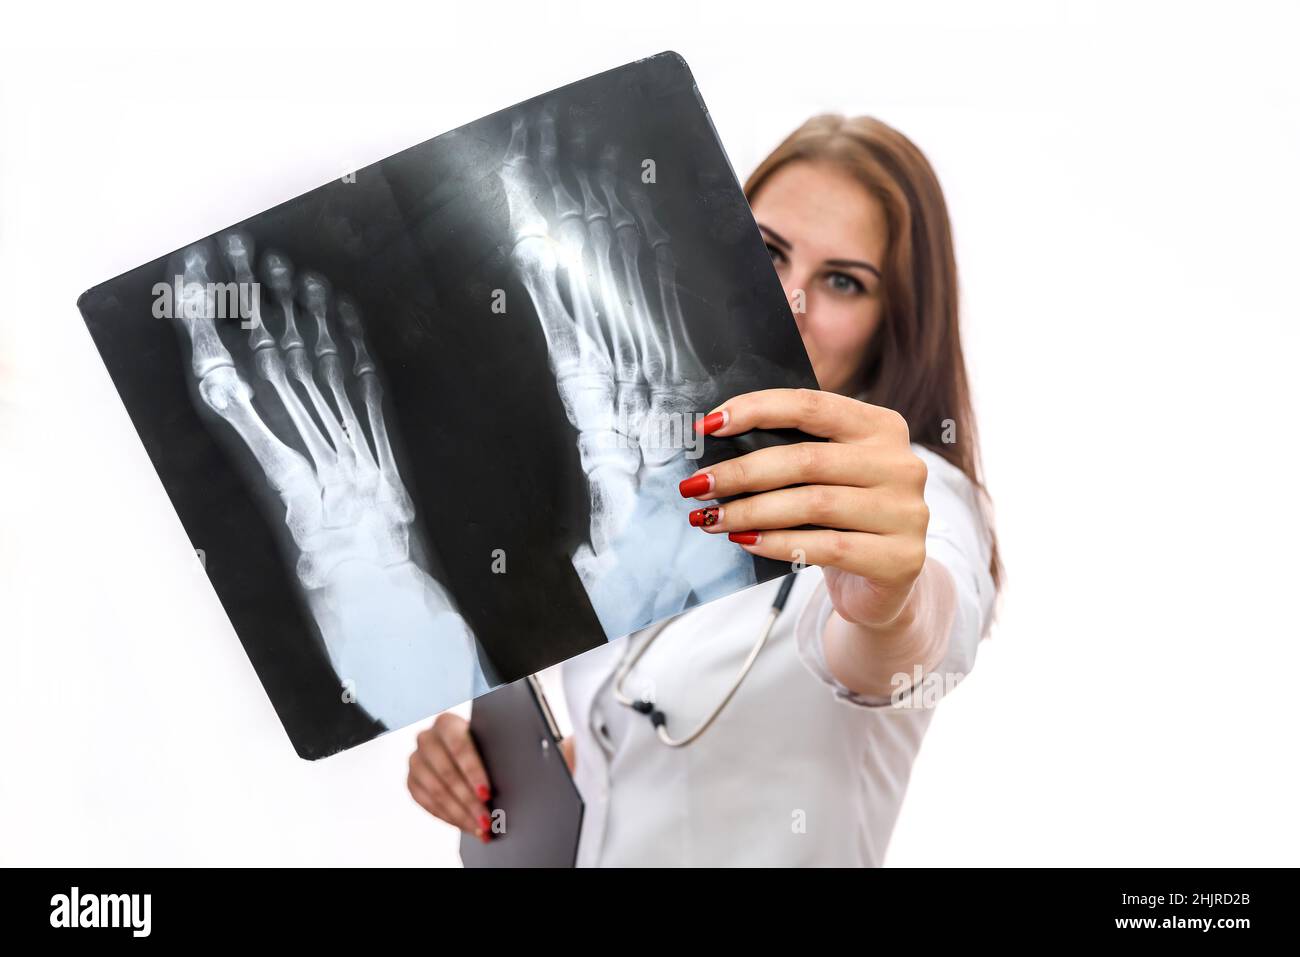 Doctor examining x-ray. Beautiful woman in medical coat with patient's x-ray isolated on white Stock Photo